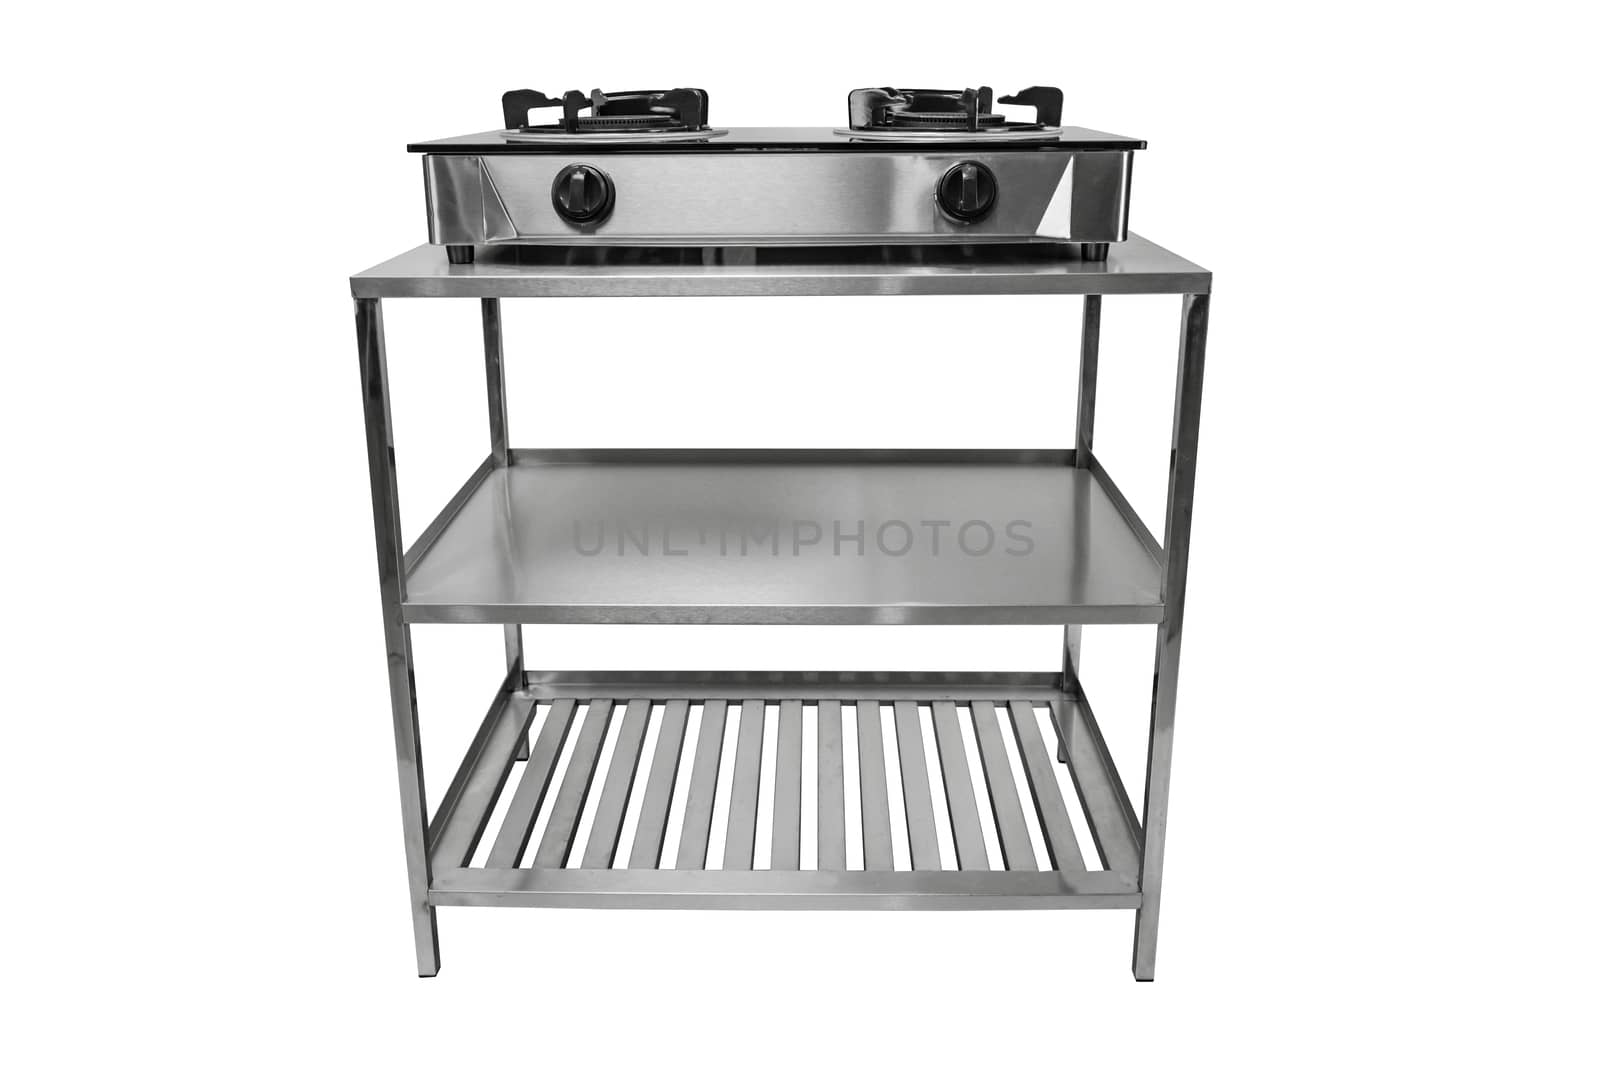 Blurred Gas stove on table of stainless on isolated white backgr by Buttus_casso